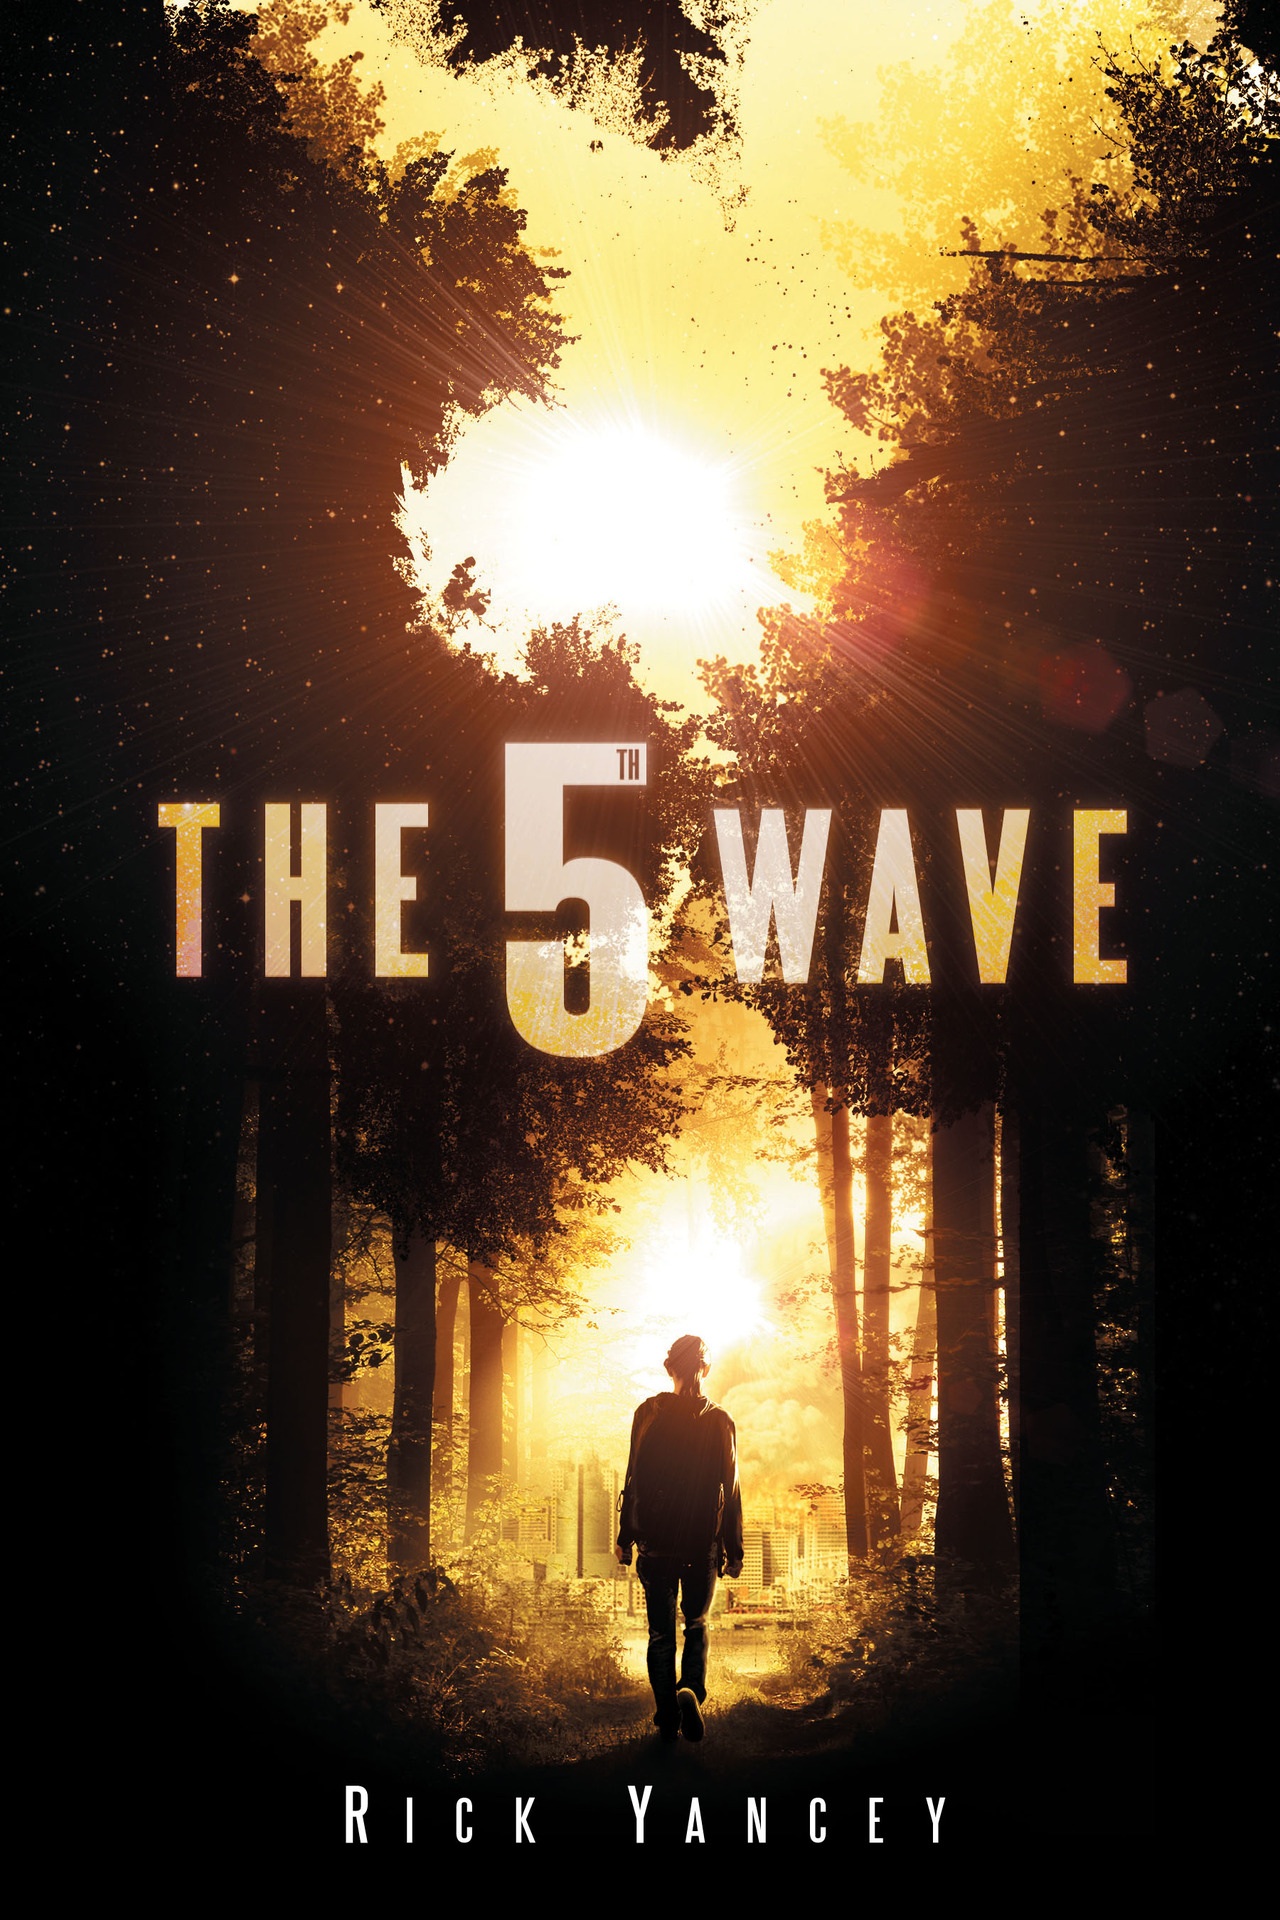 The 5th Wave book-cover